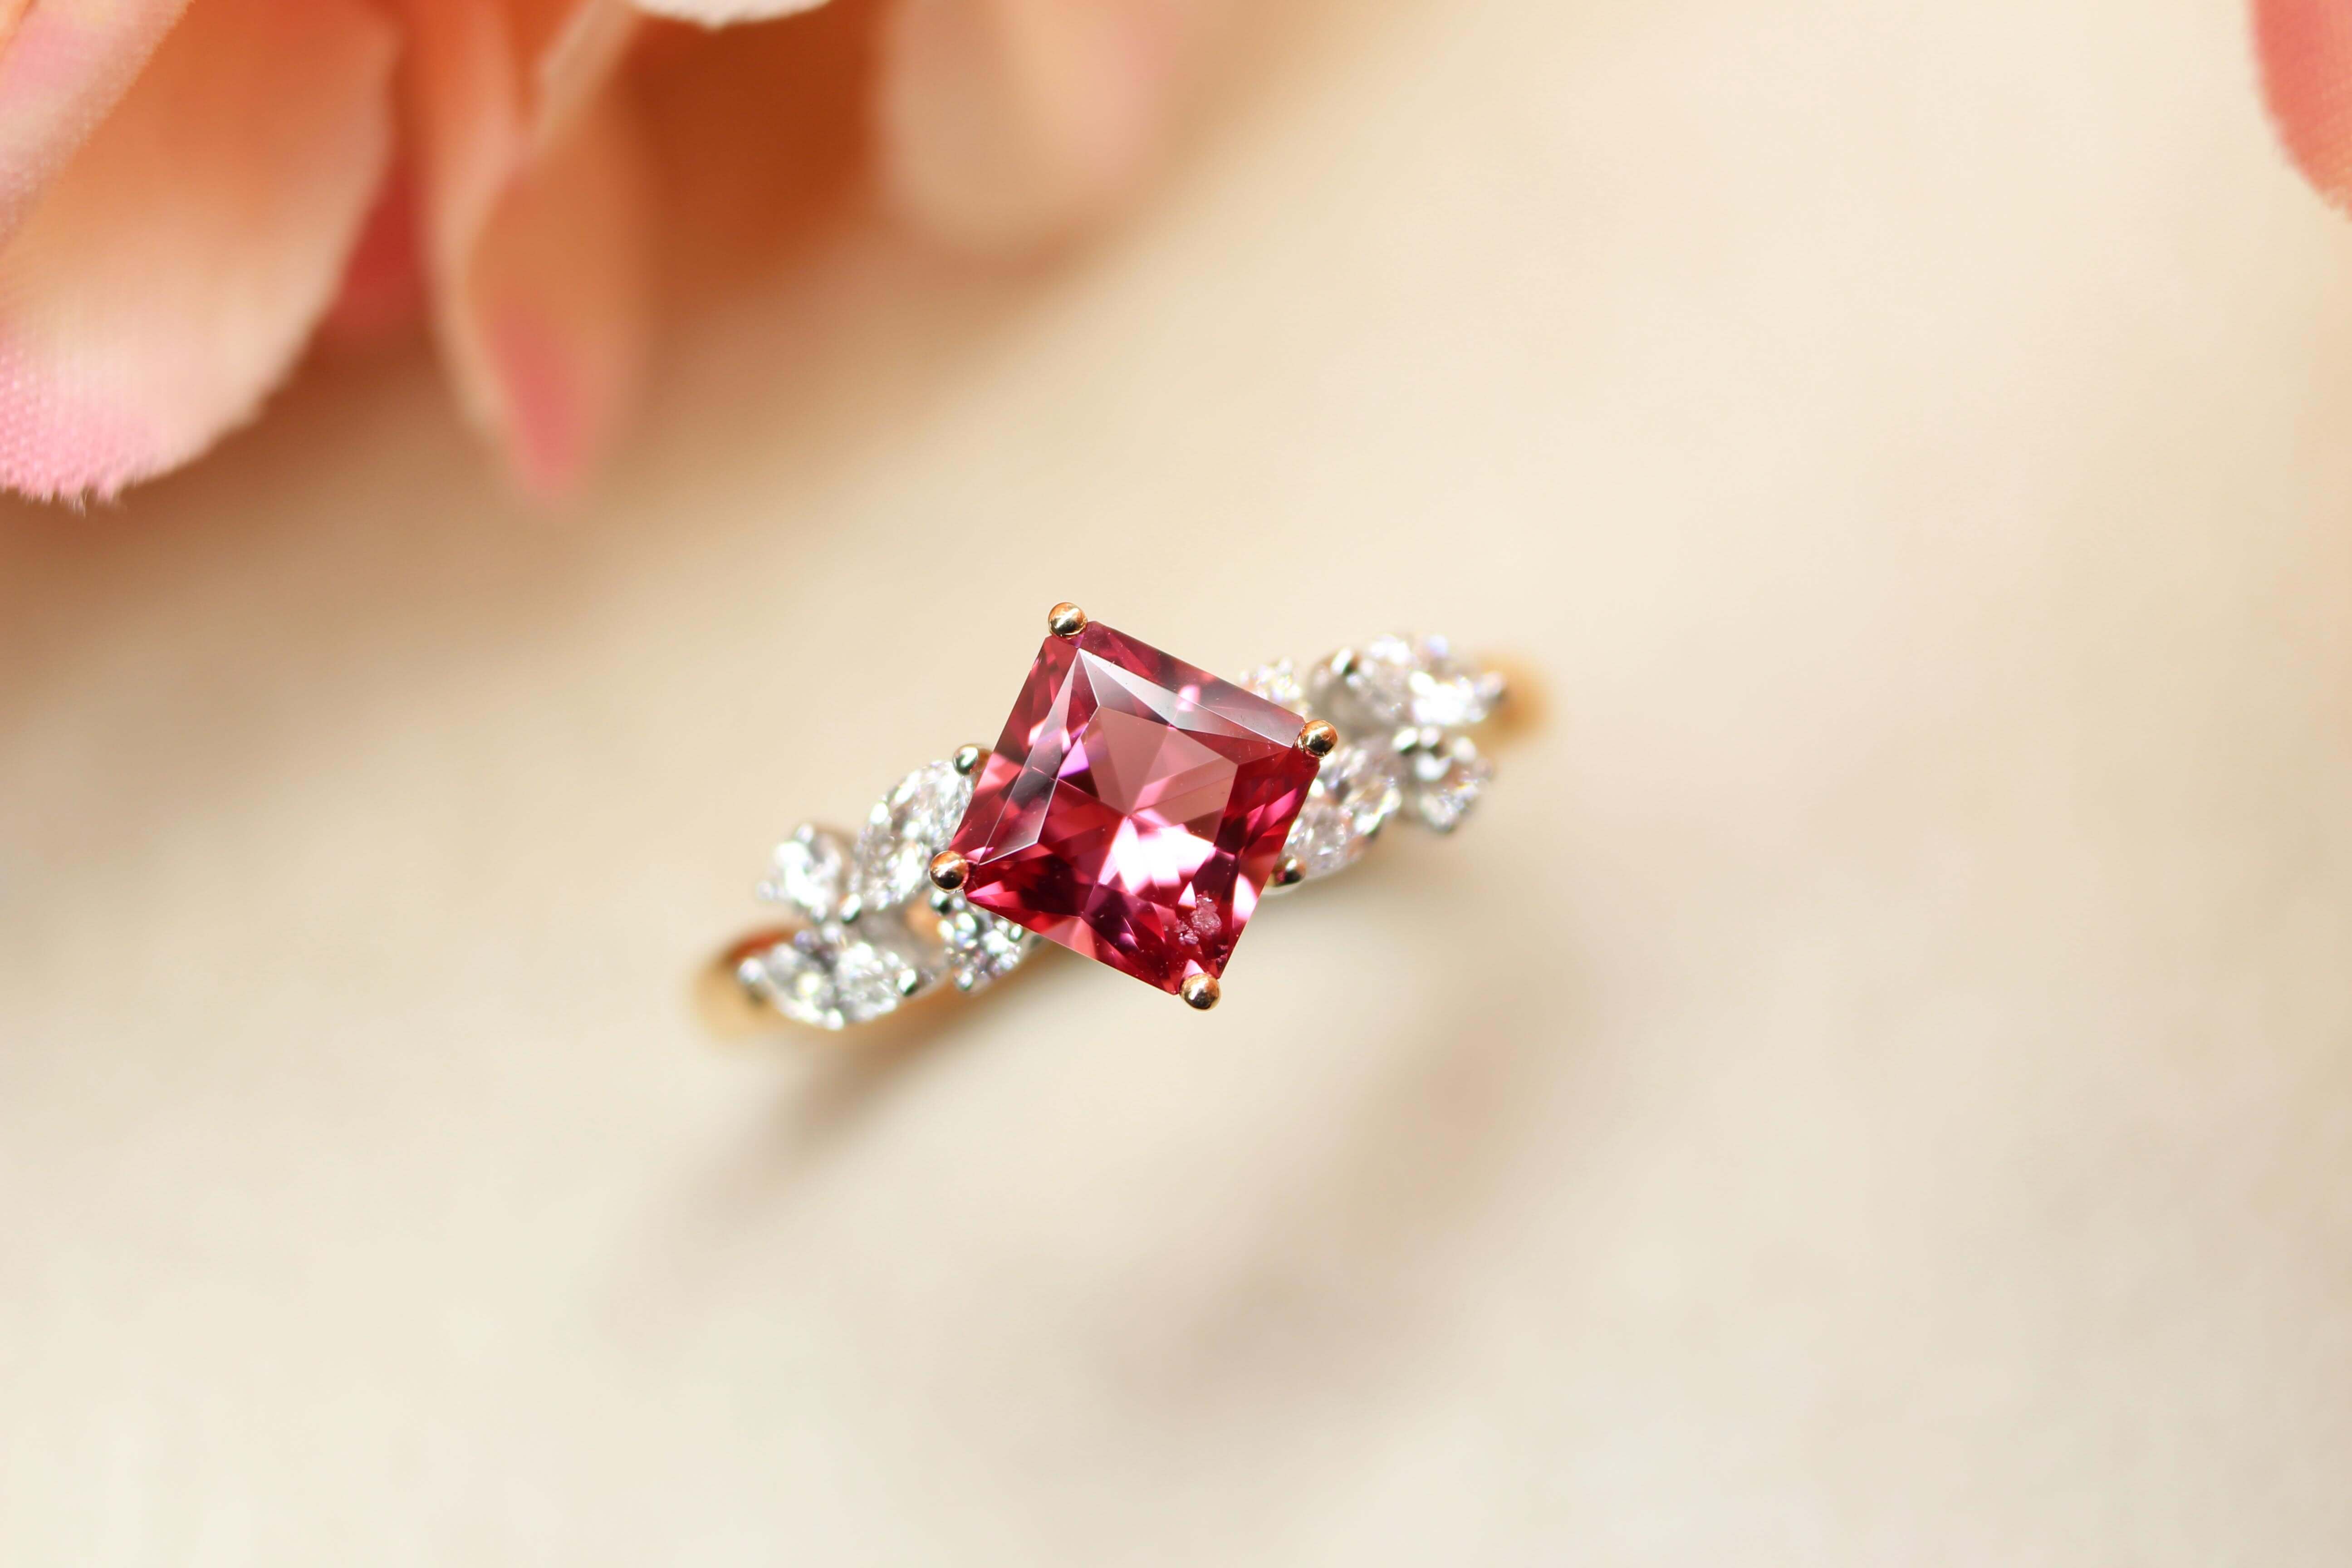 Red Princess cut Spinel Wedding Proposal Ring, unique customised engagement ring for proposal | Local Singapore bespoke Jeweller